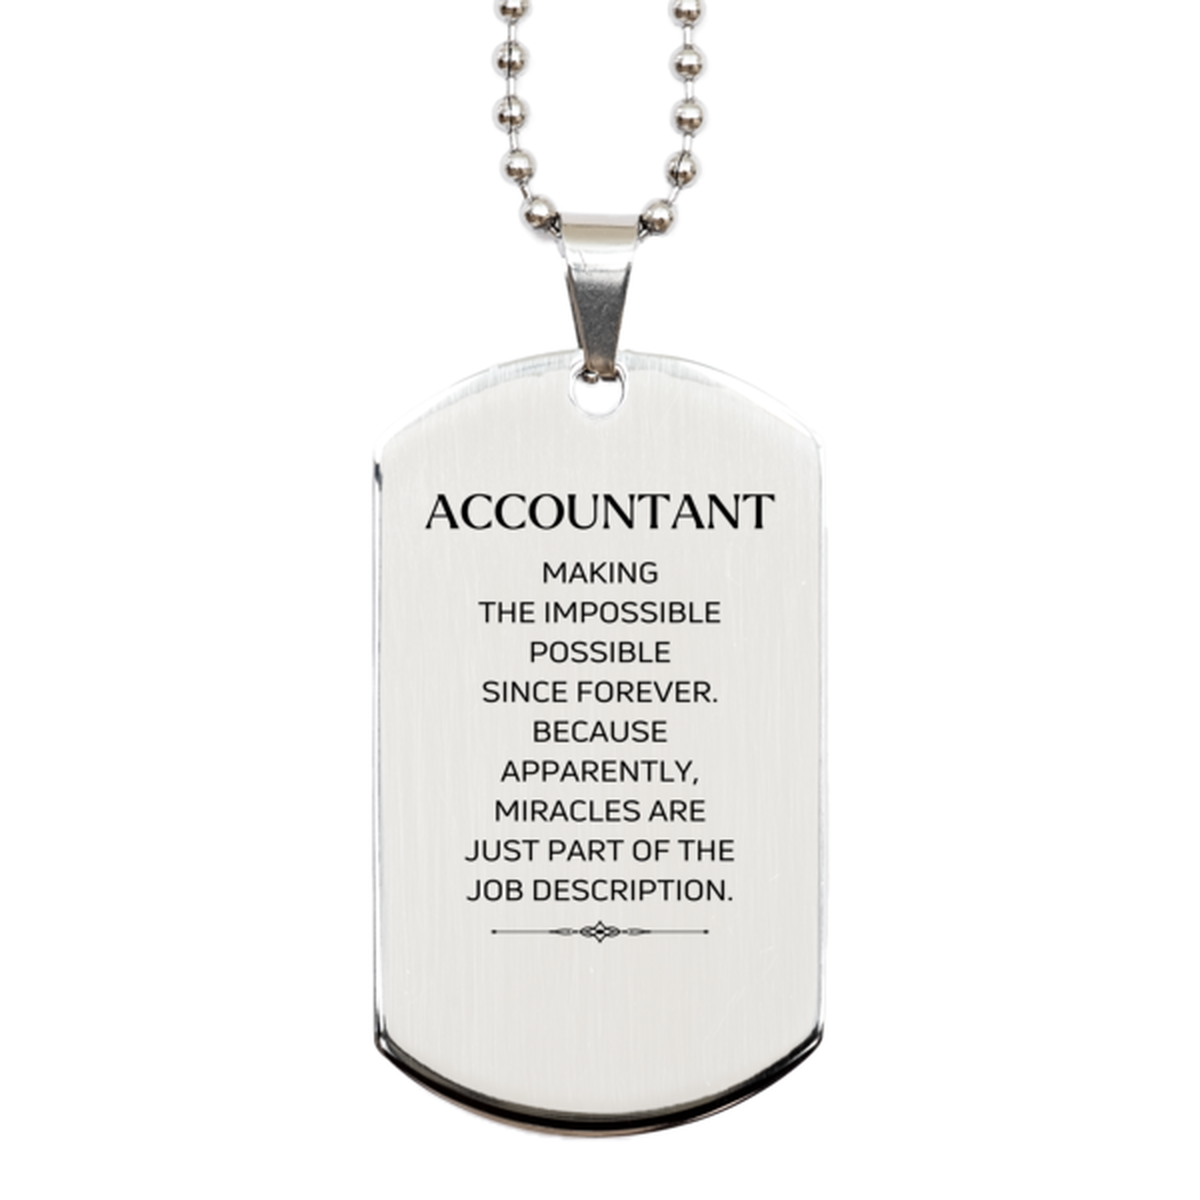 Funny Accountant Gifts, Miracles are just part of the job description, Inspirational Birthday Silver Dog Tag For Accountant, Men, Women, Coworkers, Friends, Boss